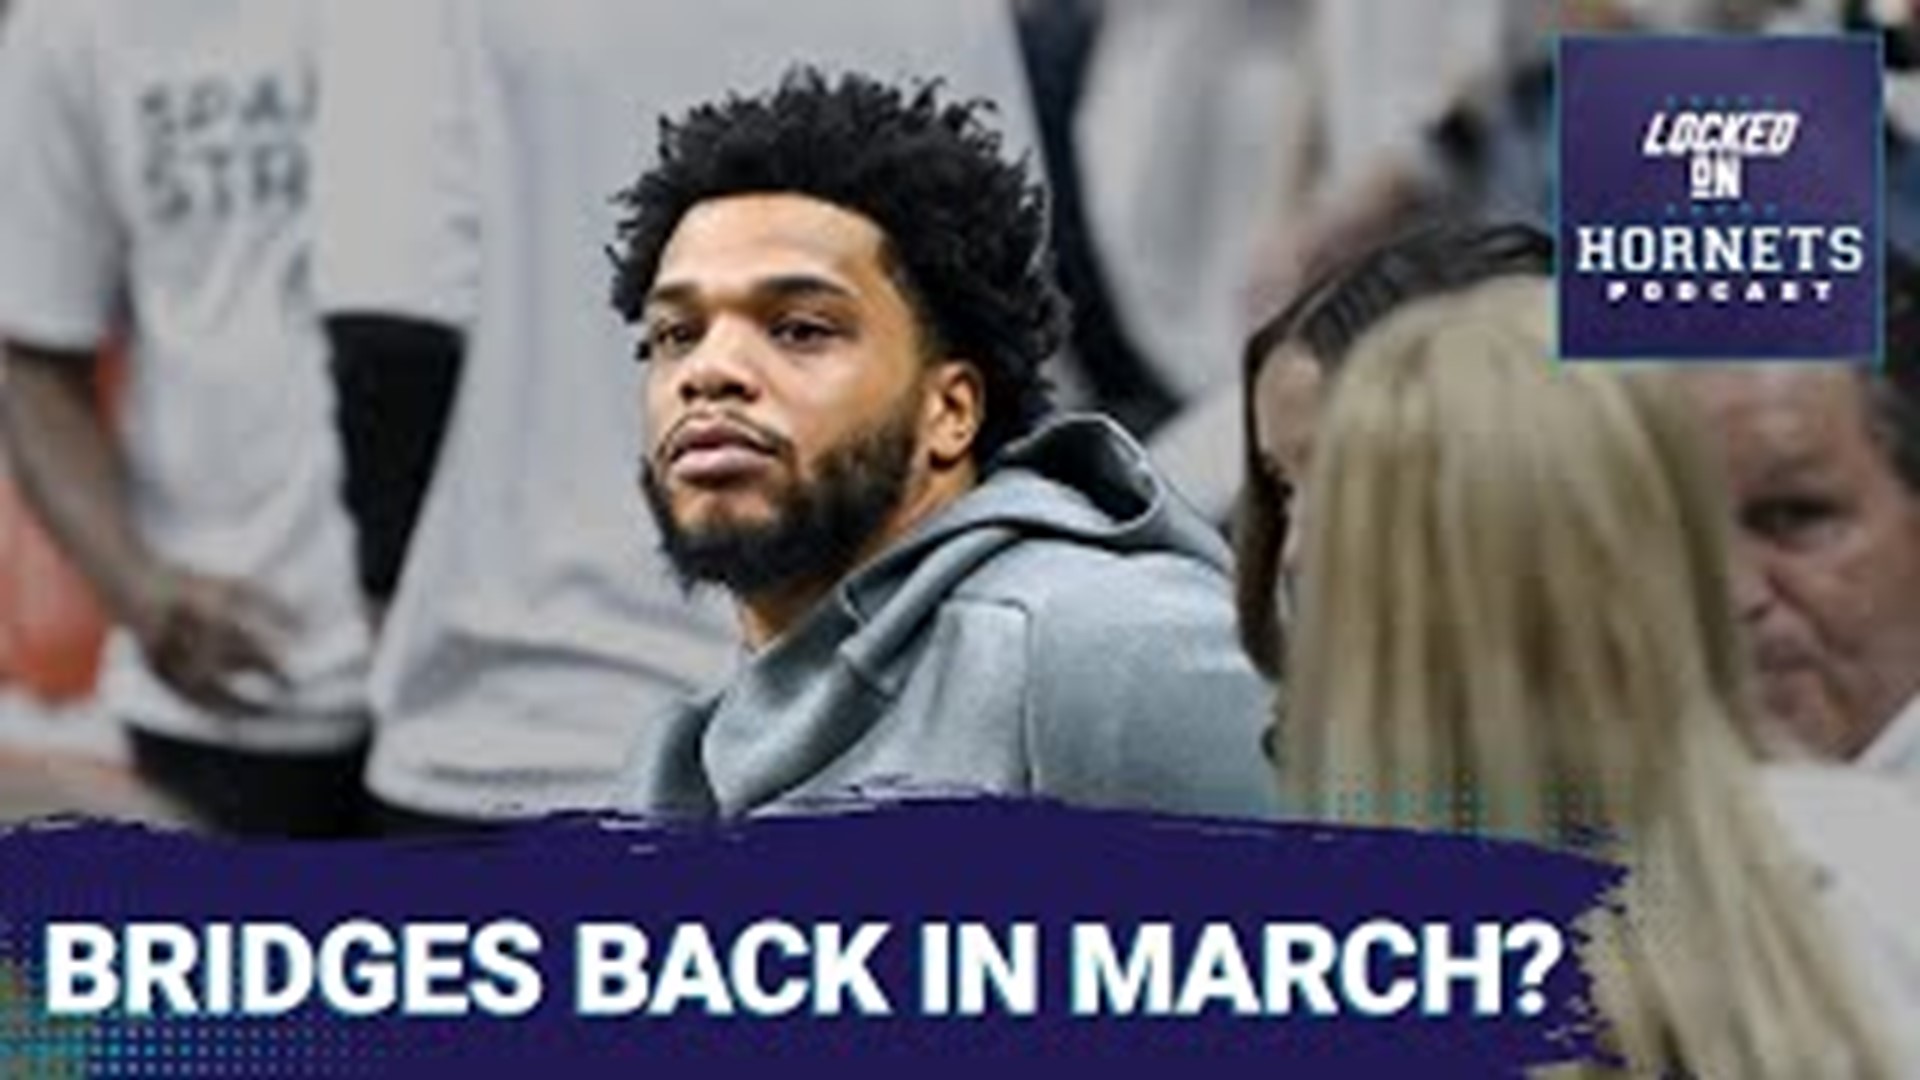 Miles Bridges told the Associated Press he "might be back in March." That and more on Locked On Hornets.